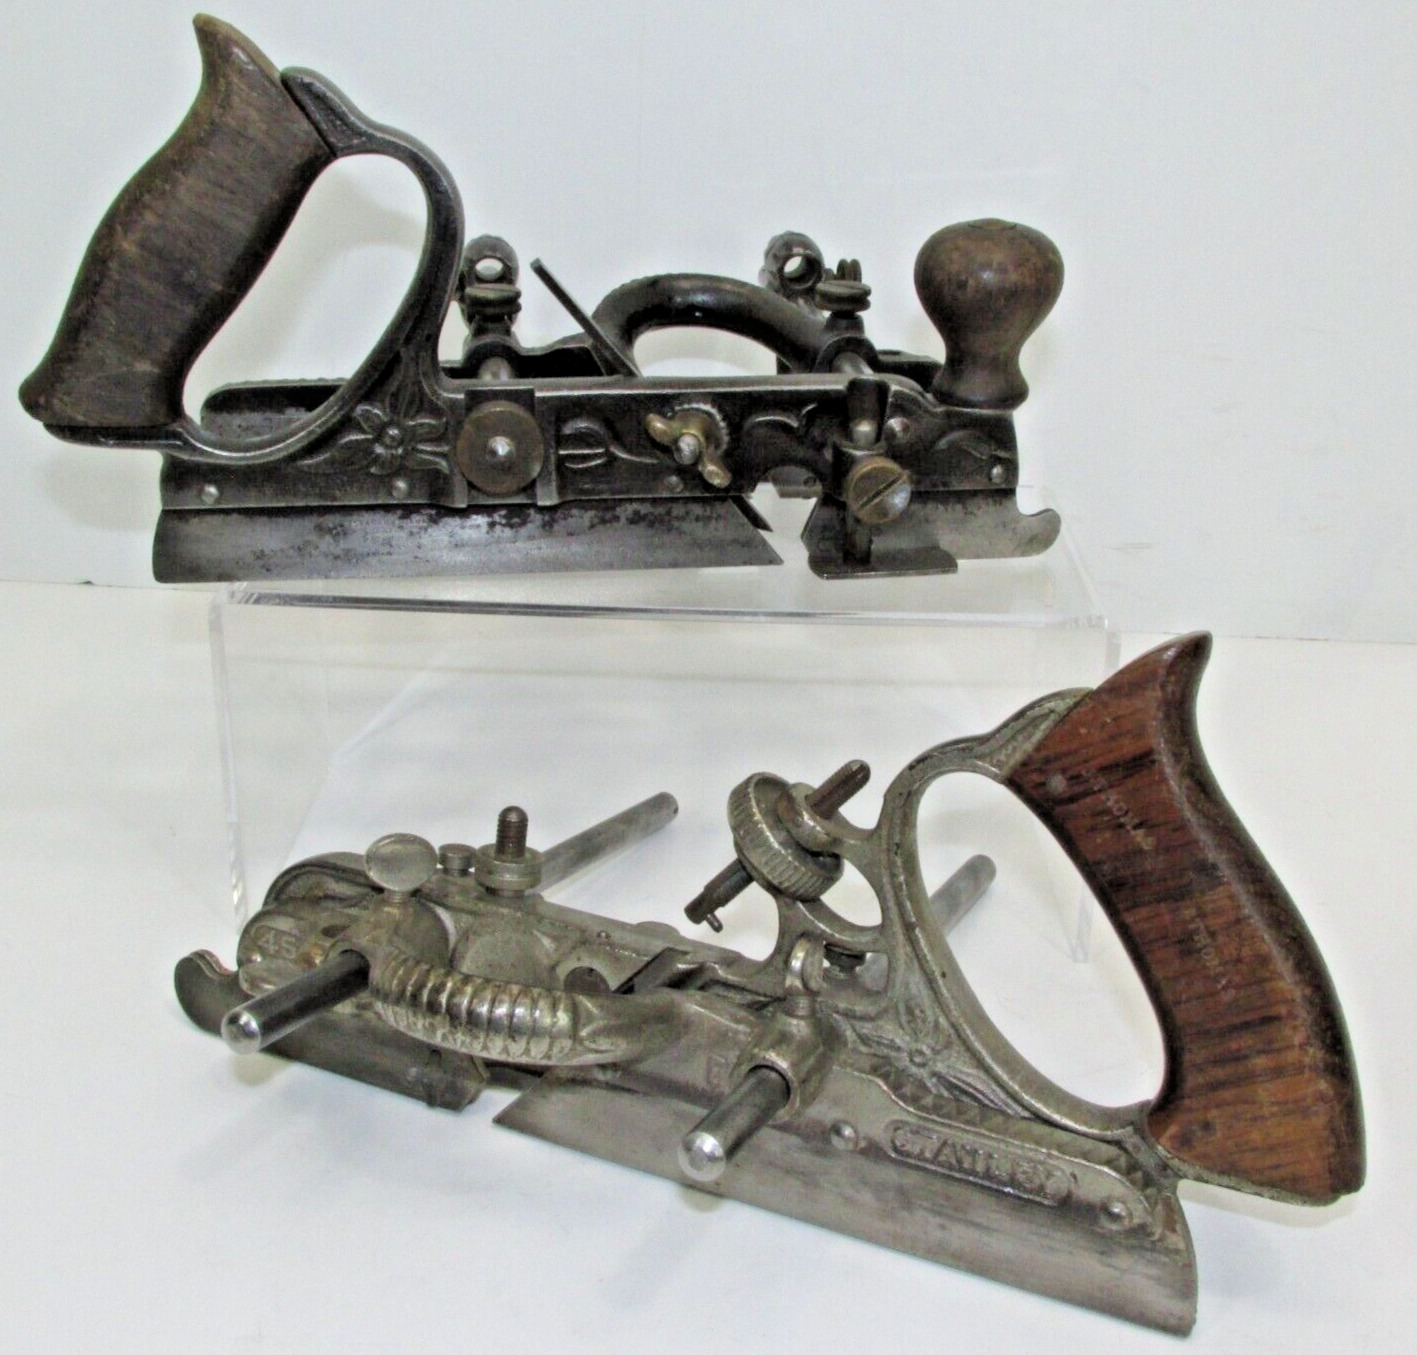 Antique Stanley No. 45 Combination Planes - Set of 2 with some blades